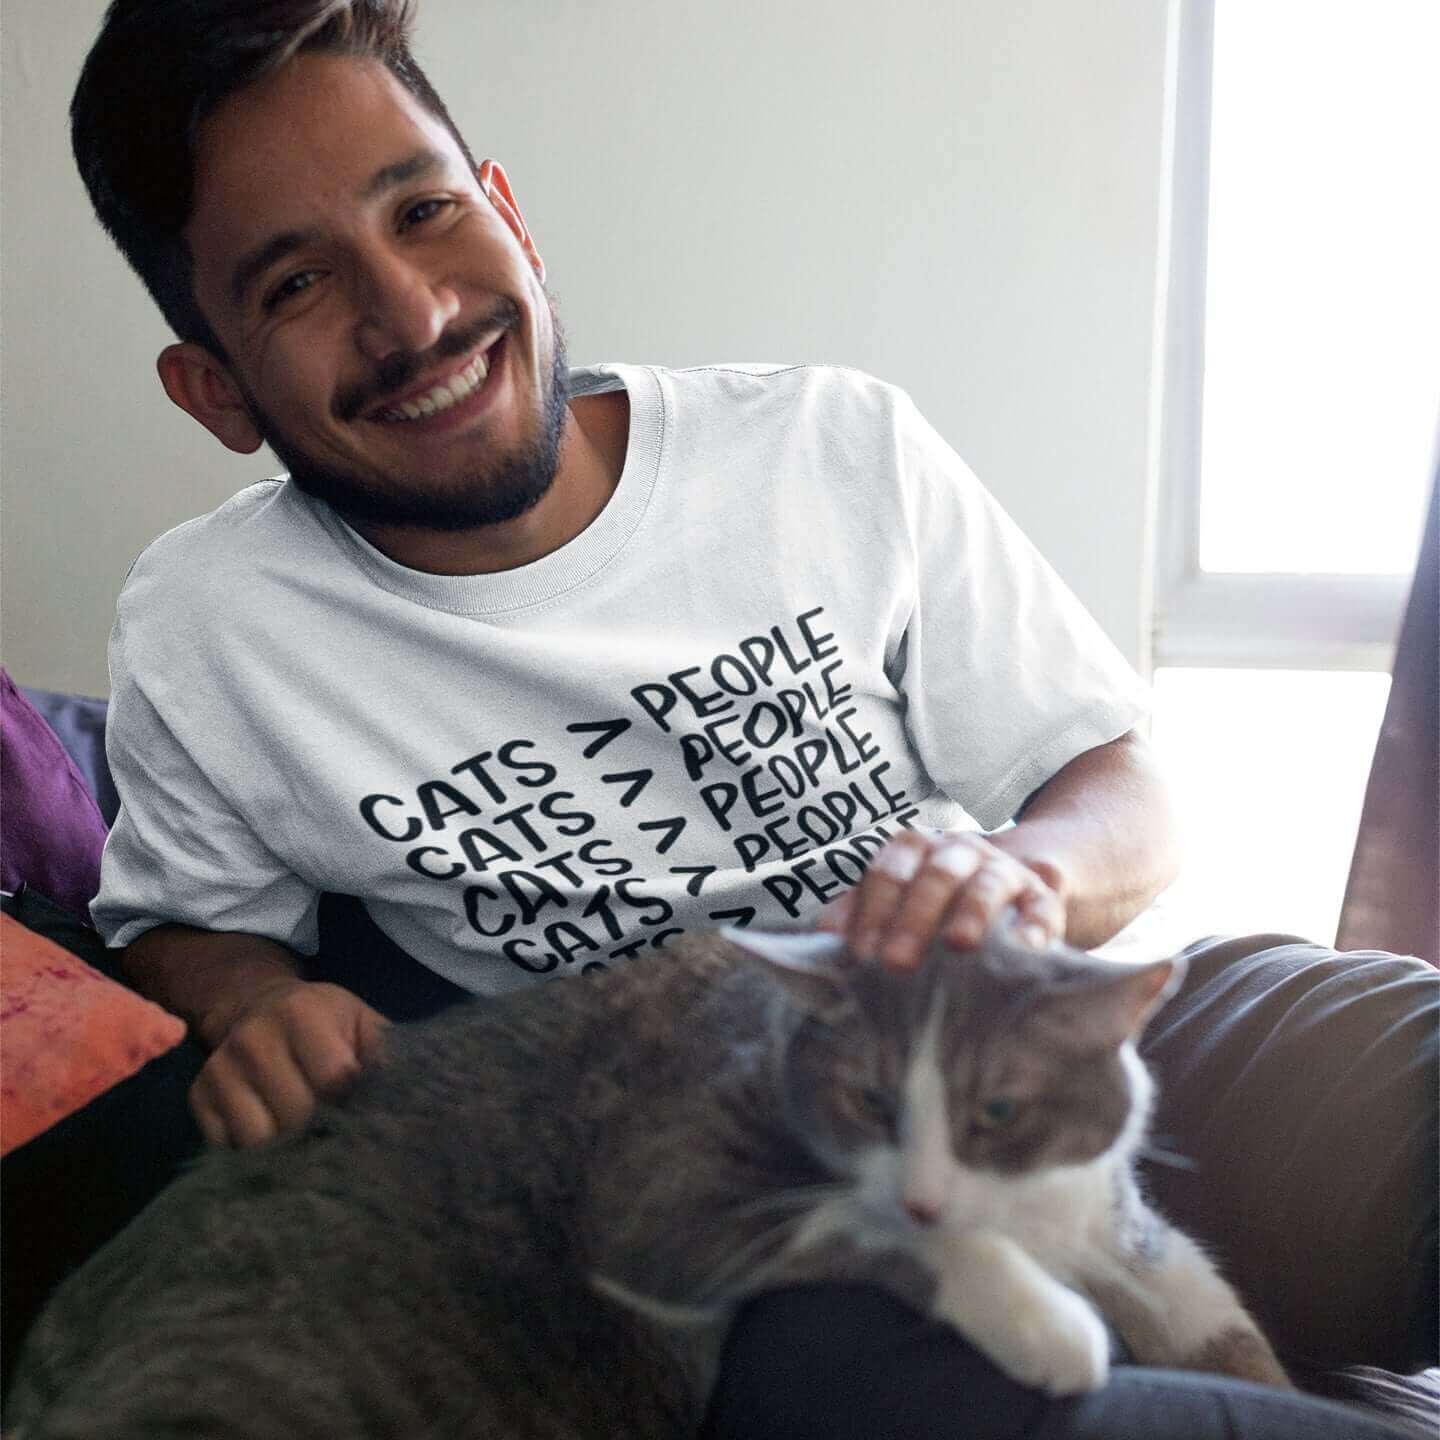 Man petting a cat while wearing a white t-shirt with the words Cats > people printed on the front.